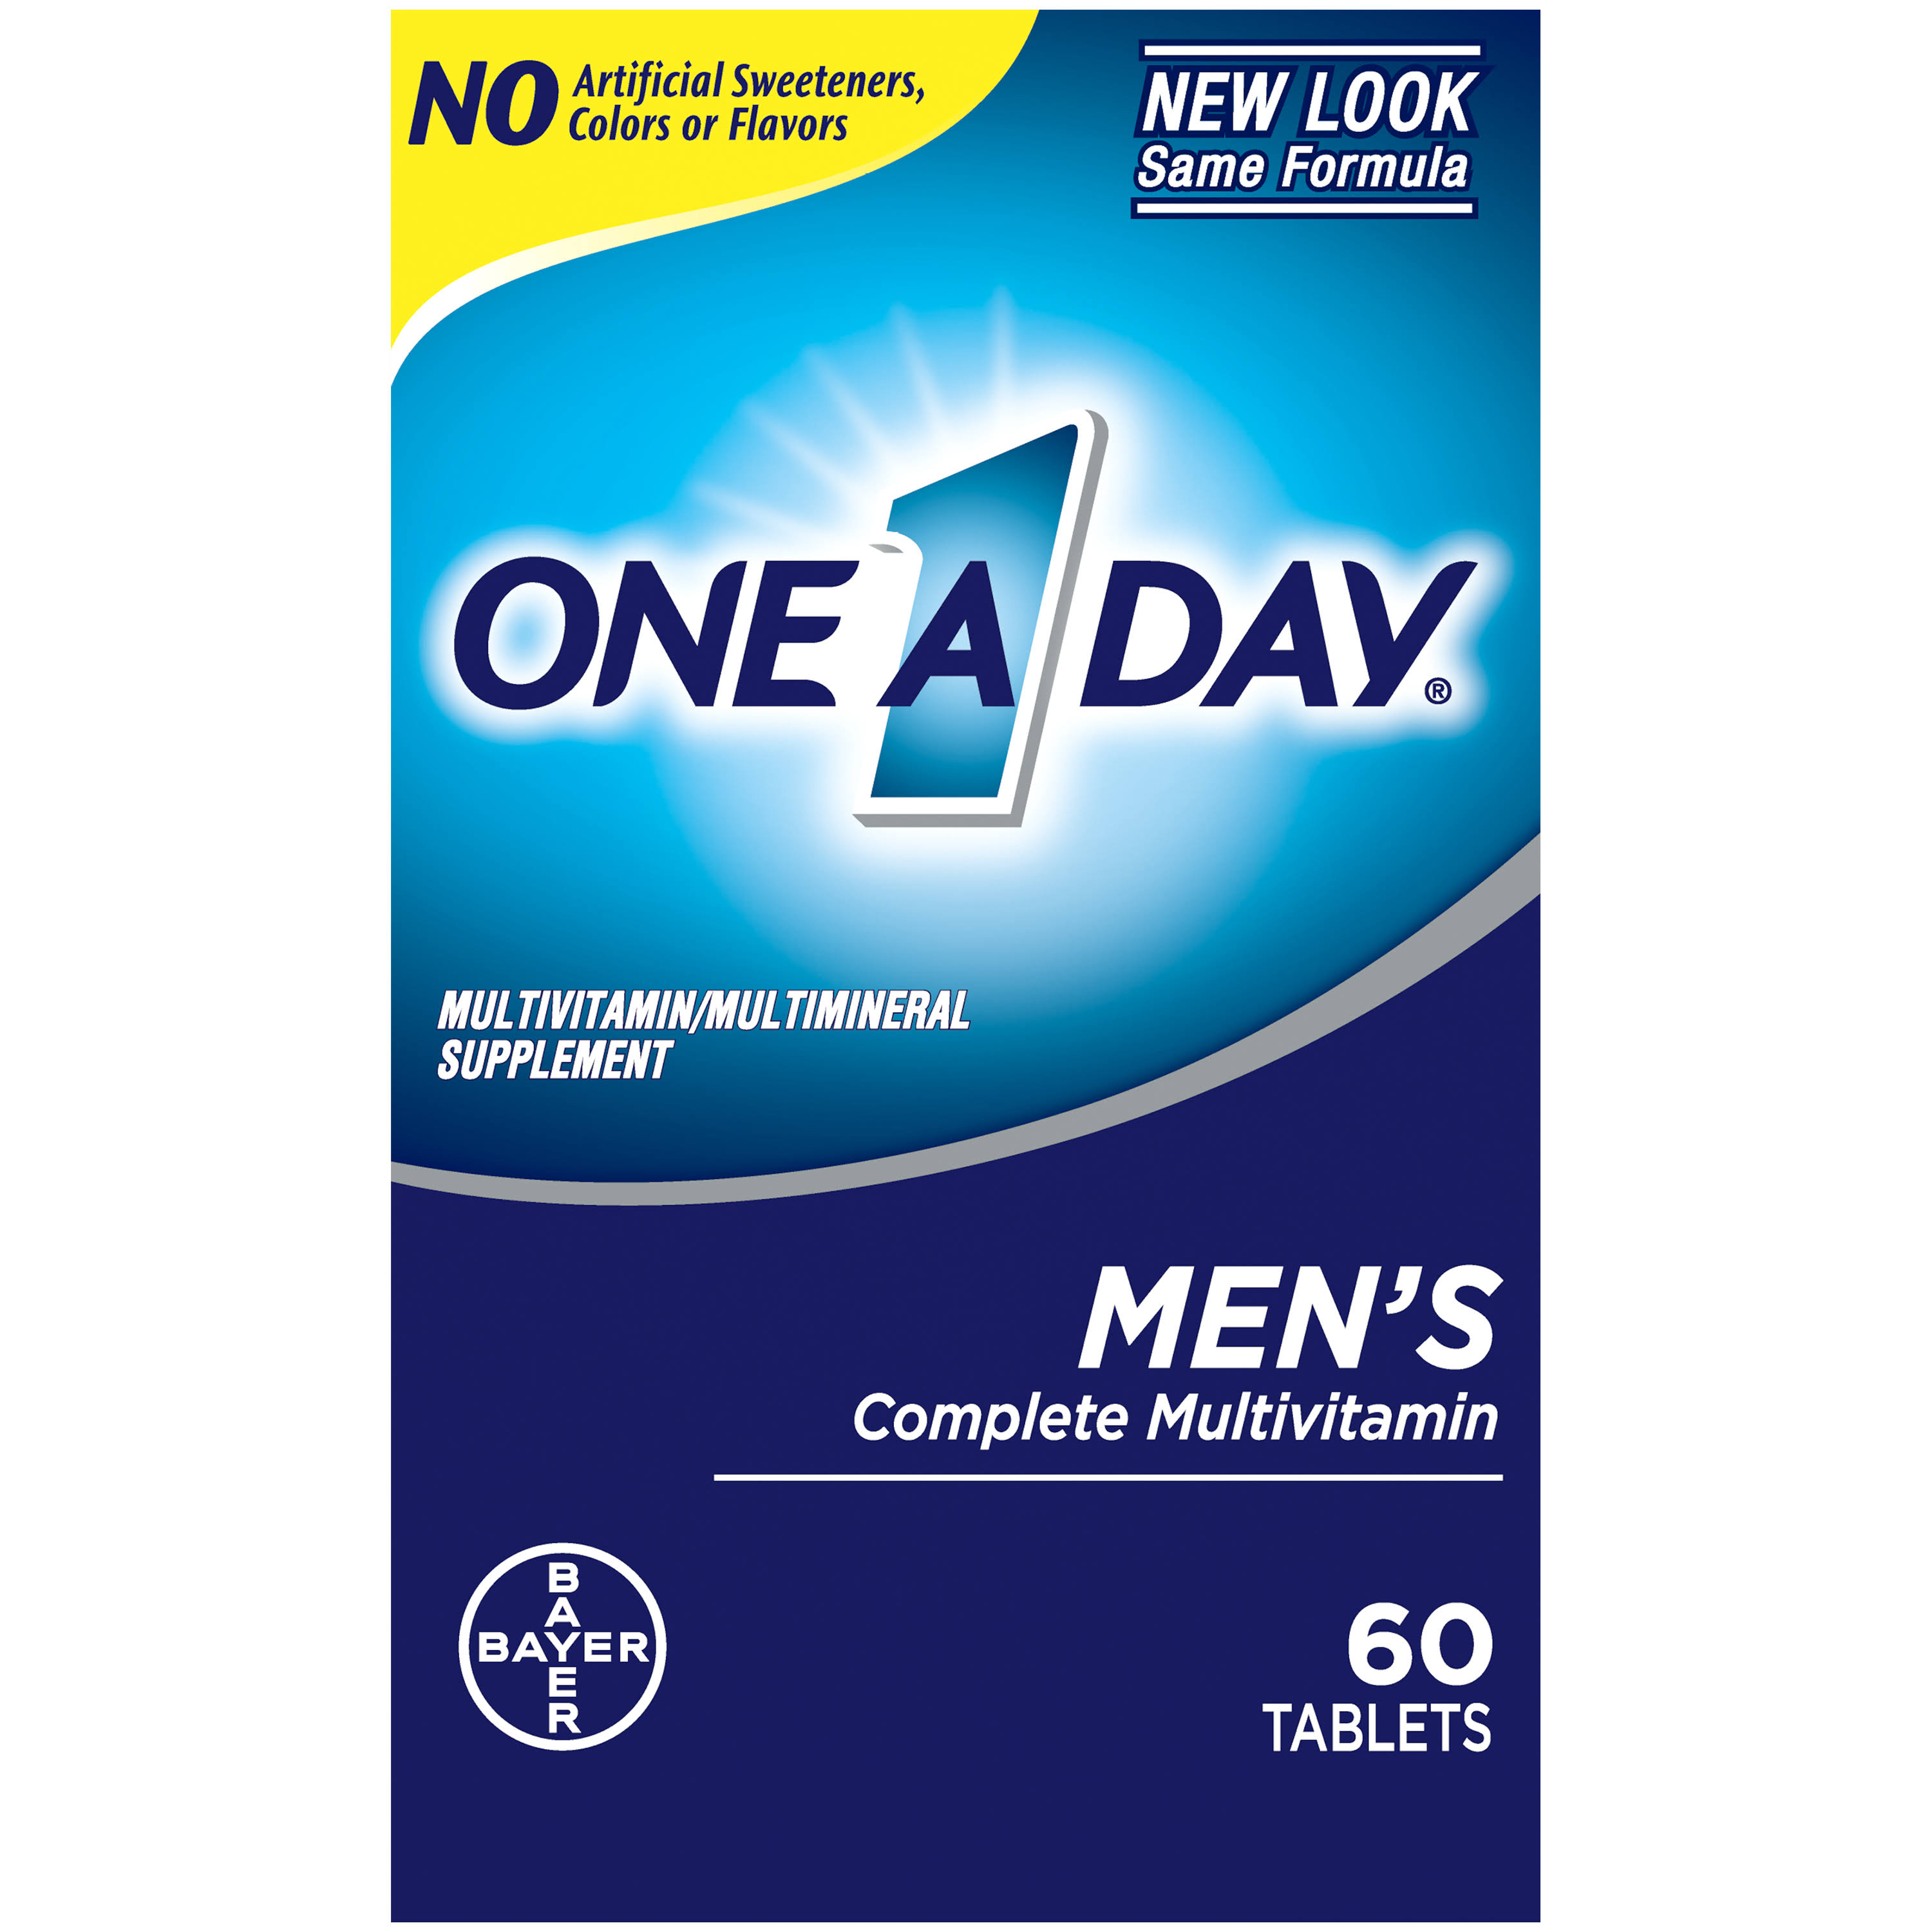 One A Day Multivitamin/Multimineral Supplement, Complete, Men's, Tablets - 60 tablets